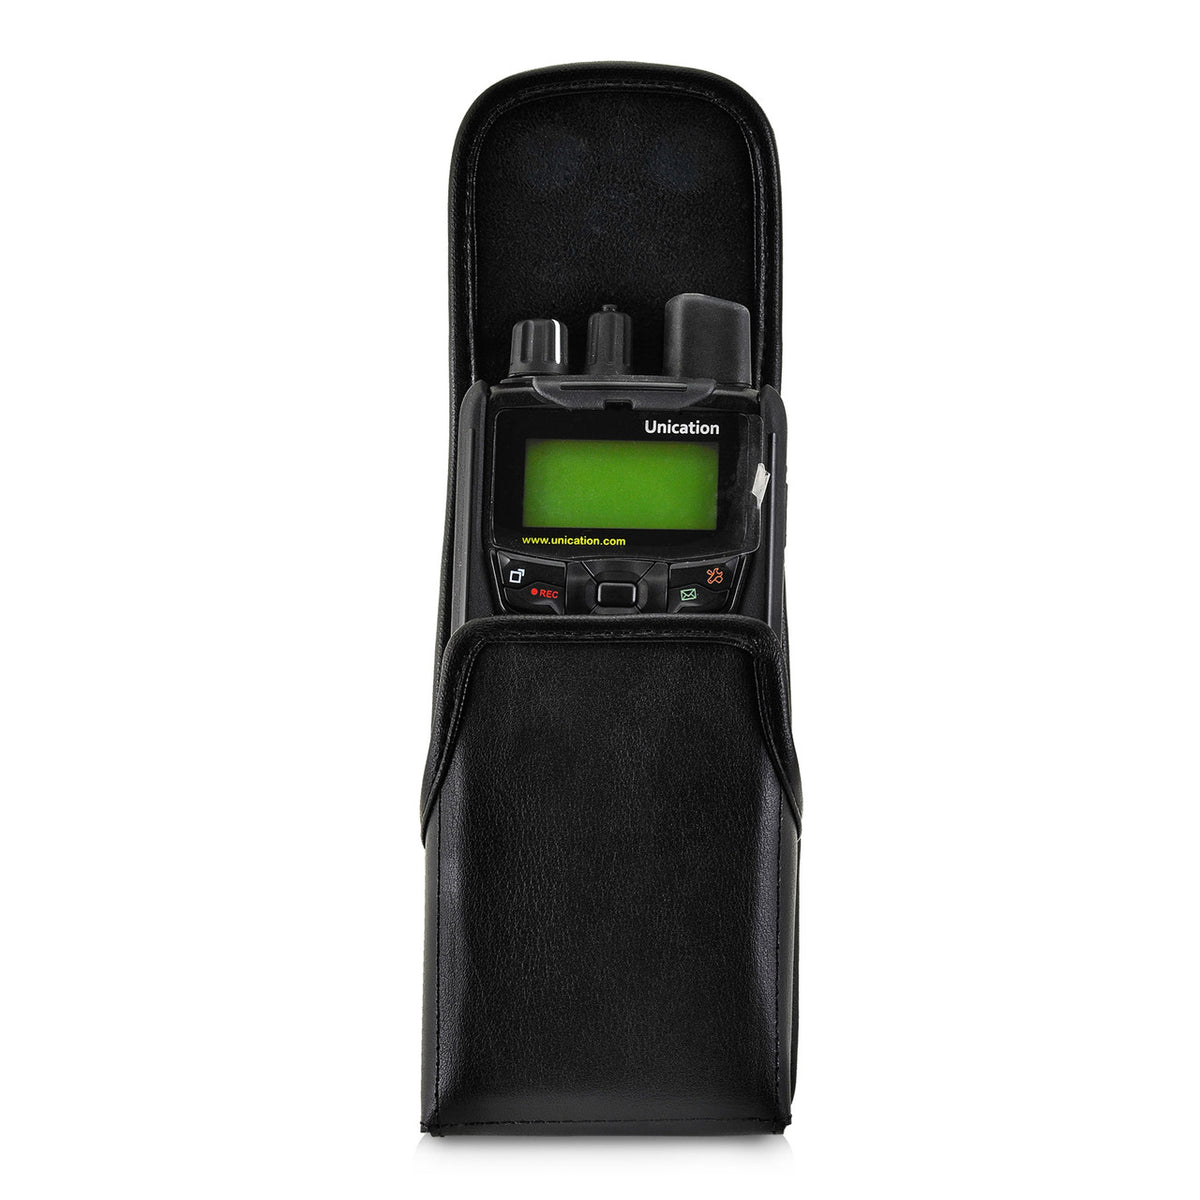 Turtleback Leather Case with magnetic closure for Unication G1 Pagers